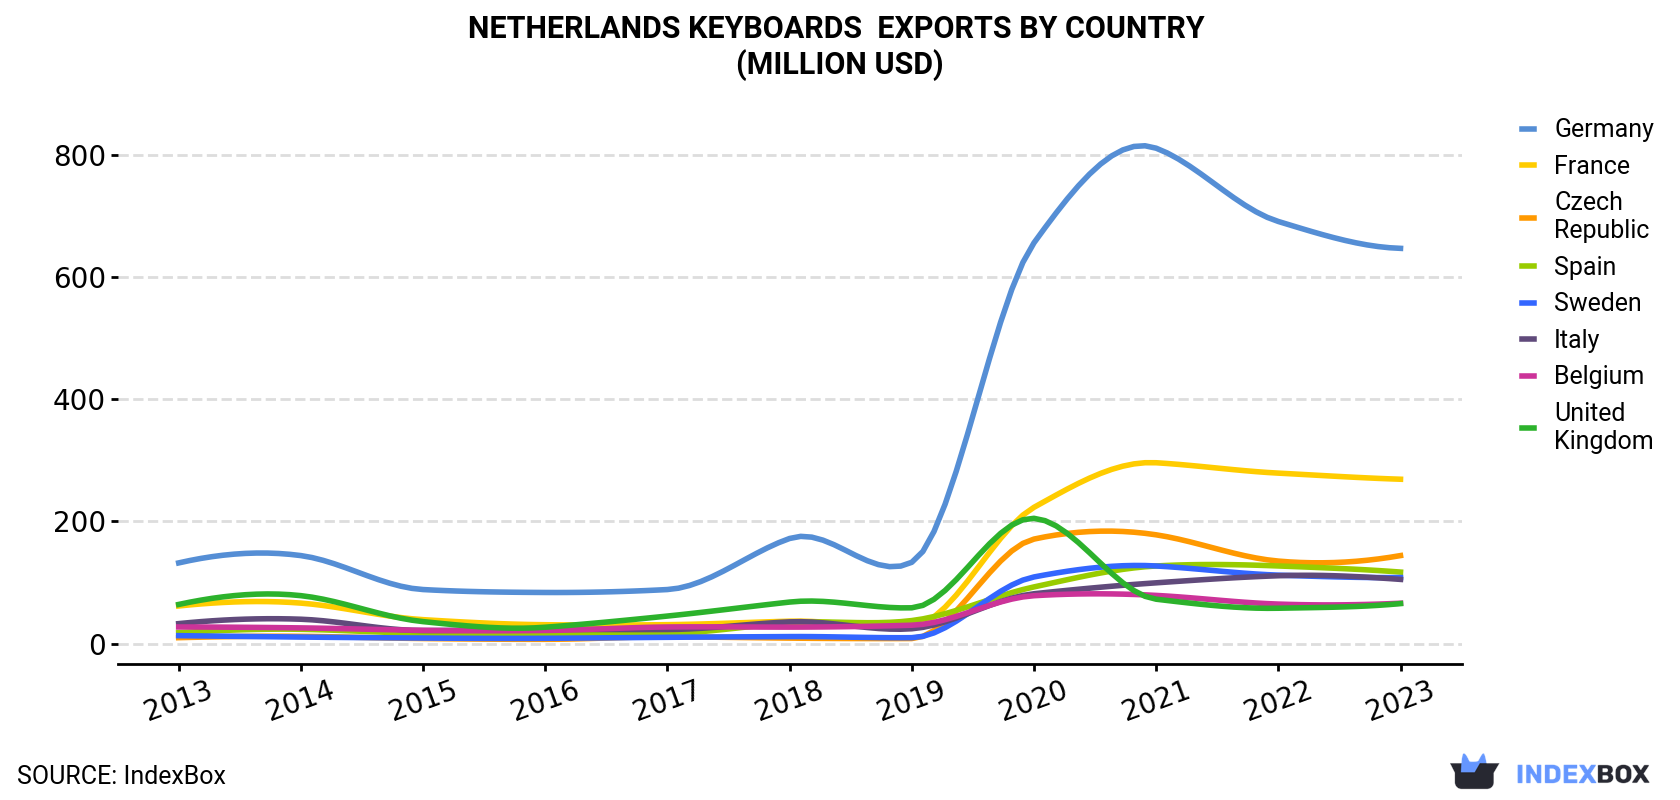 Netherlands Keyboards Exports By Country (Million USD)